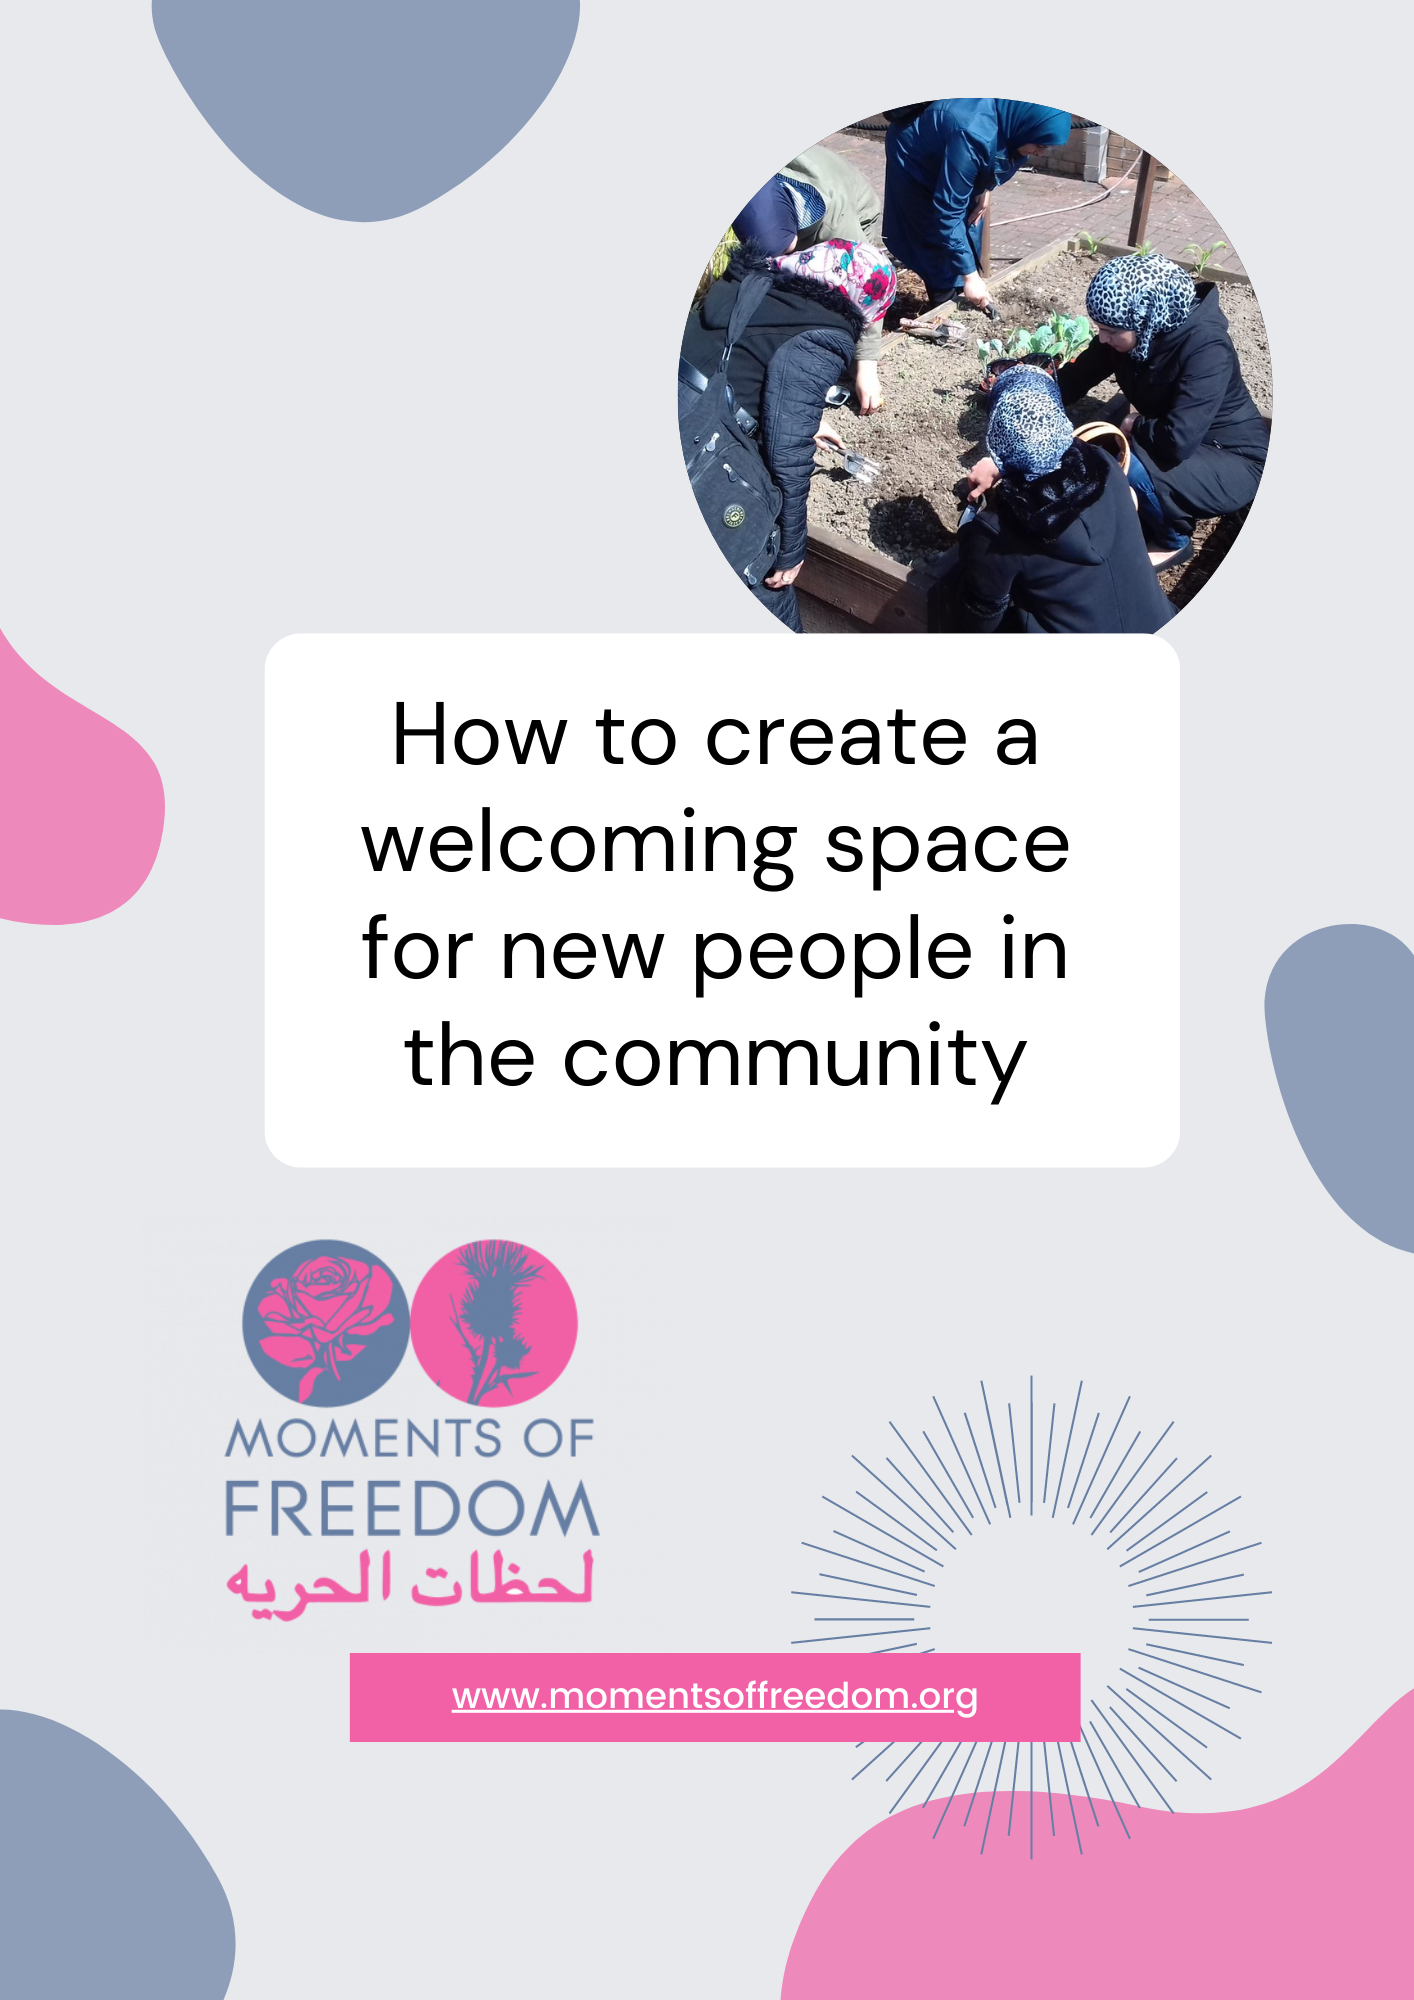 How to create a welcoming space for new people in the community